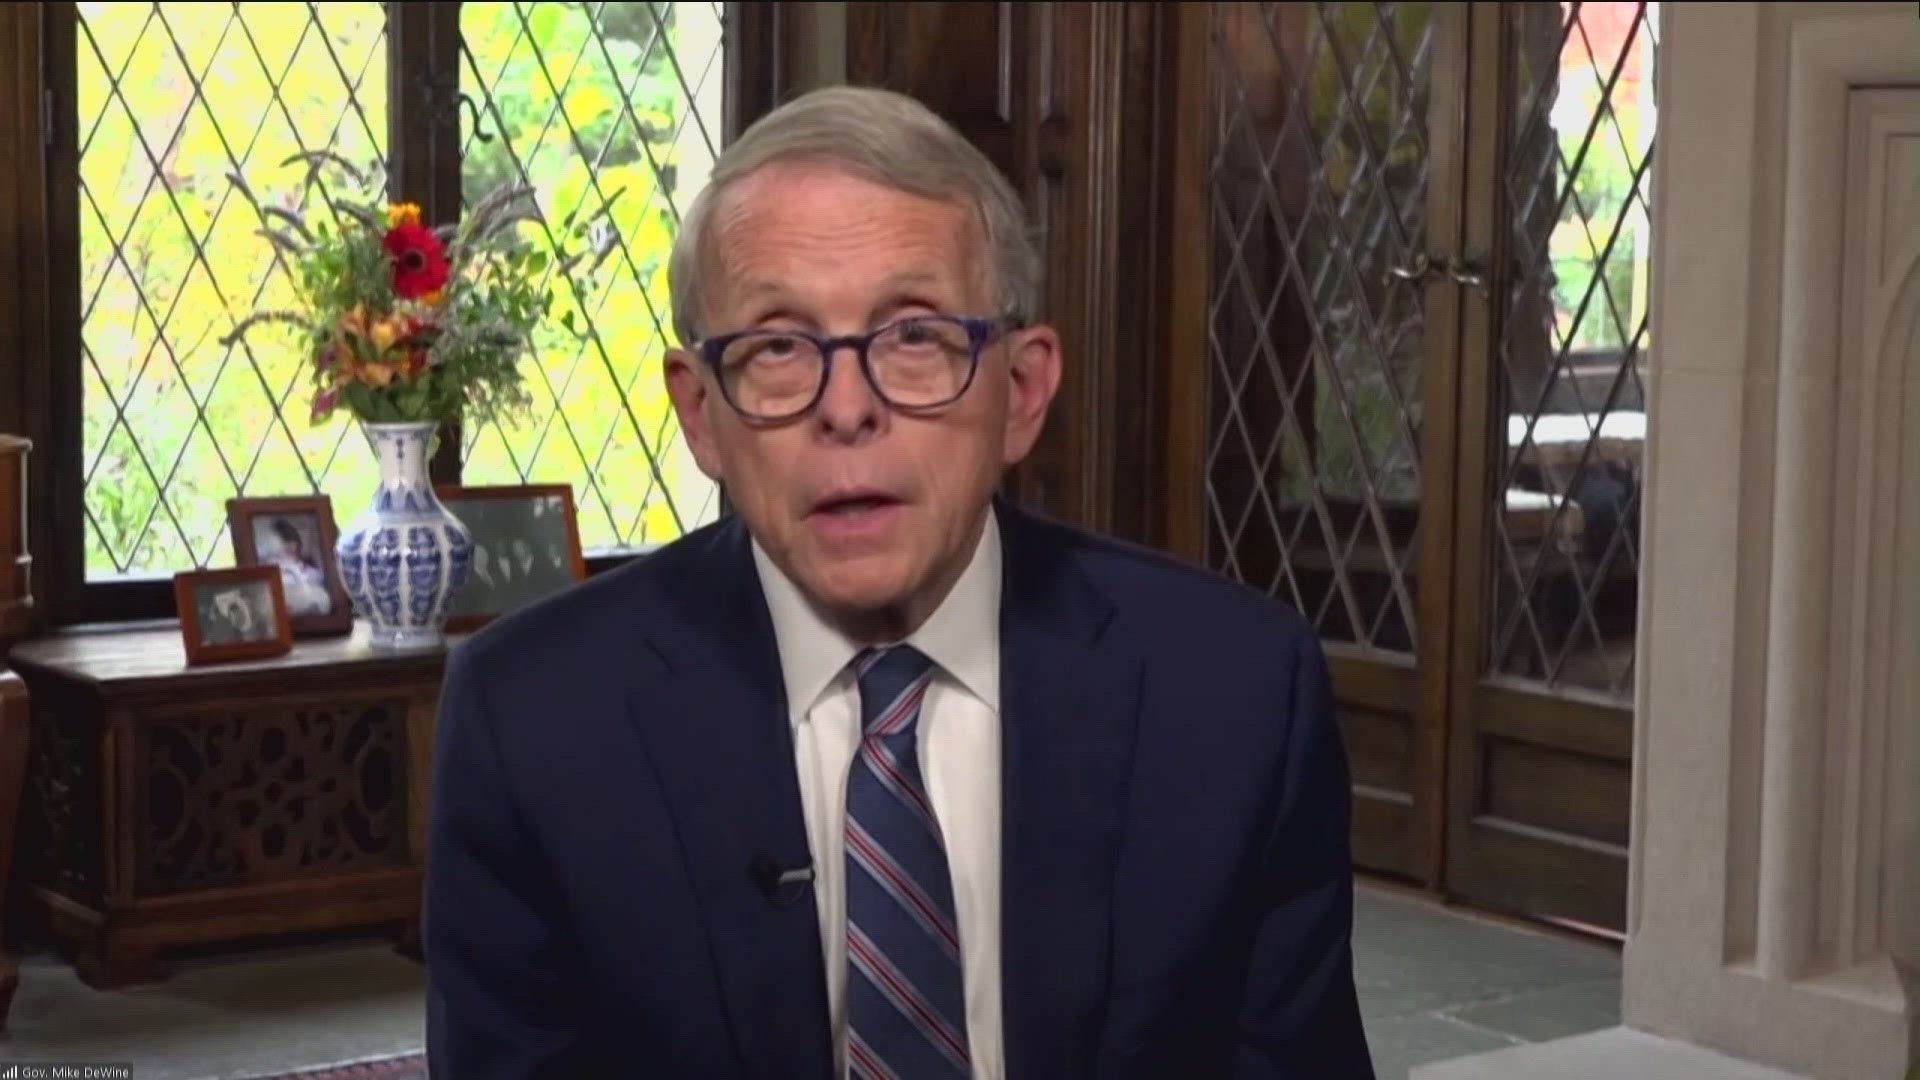 WTOL 11's TaTiana Cash spoke with Ohio Gov. Mike DeWine, who is opposed to Issue 2, and a voter who is in favor of it.